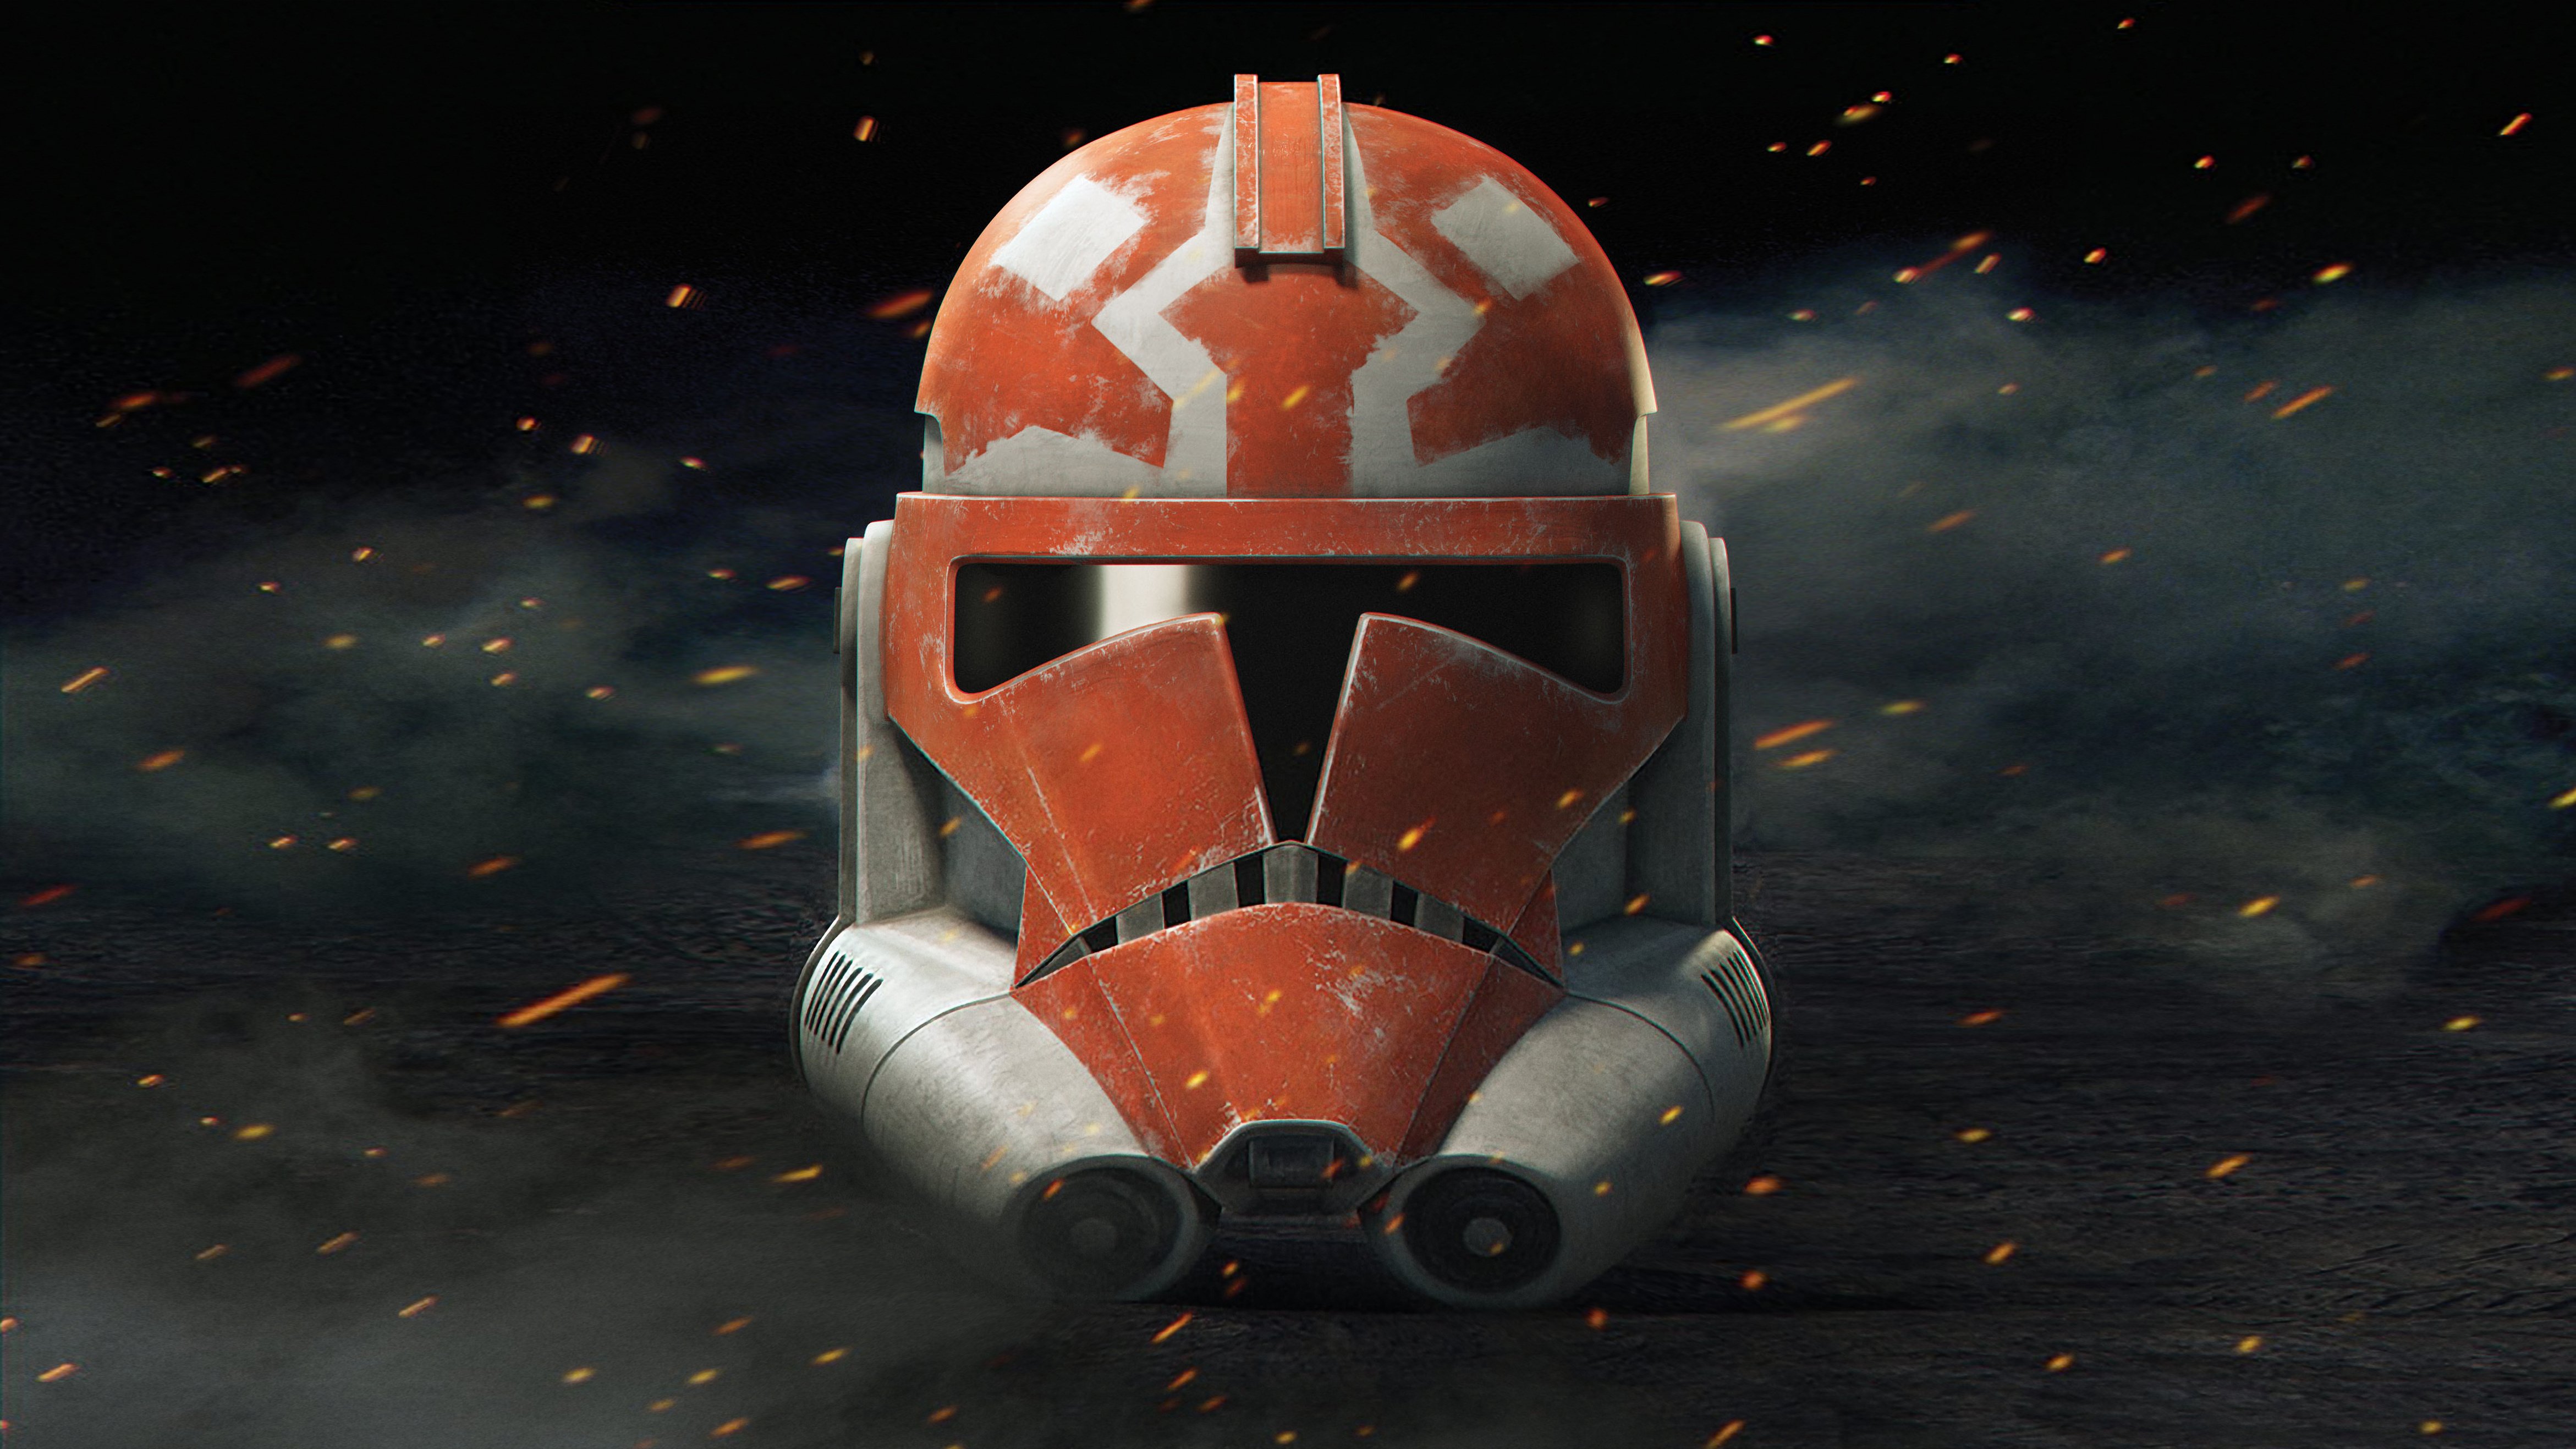 Trooper 4K wallpaper for your desktop or mobile screen free and easy to download